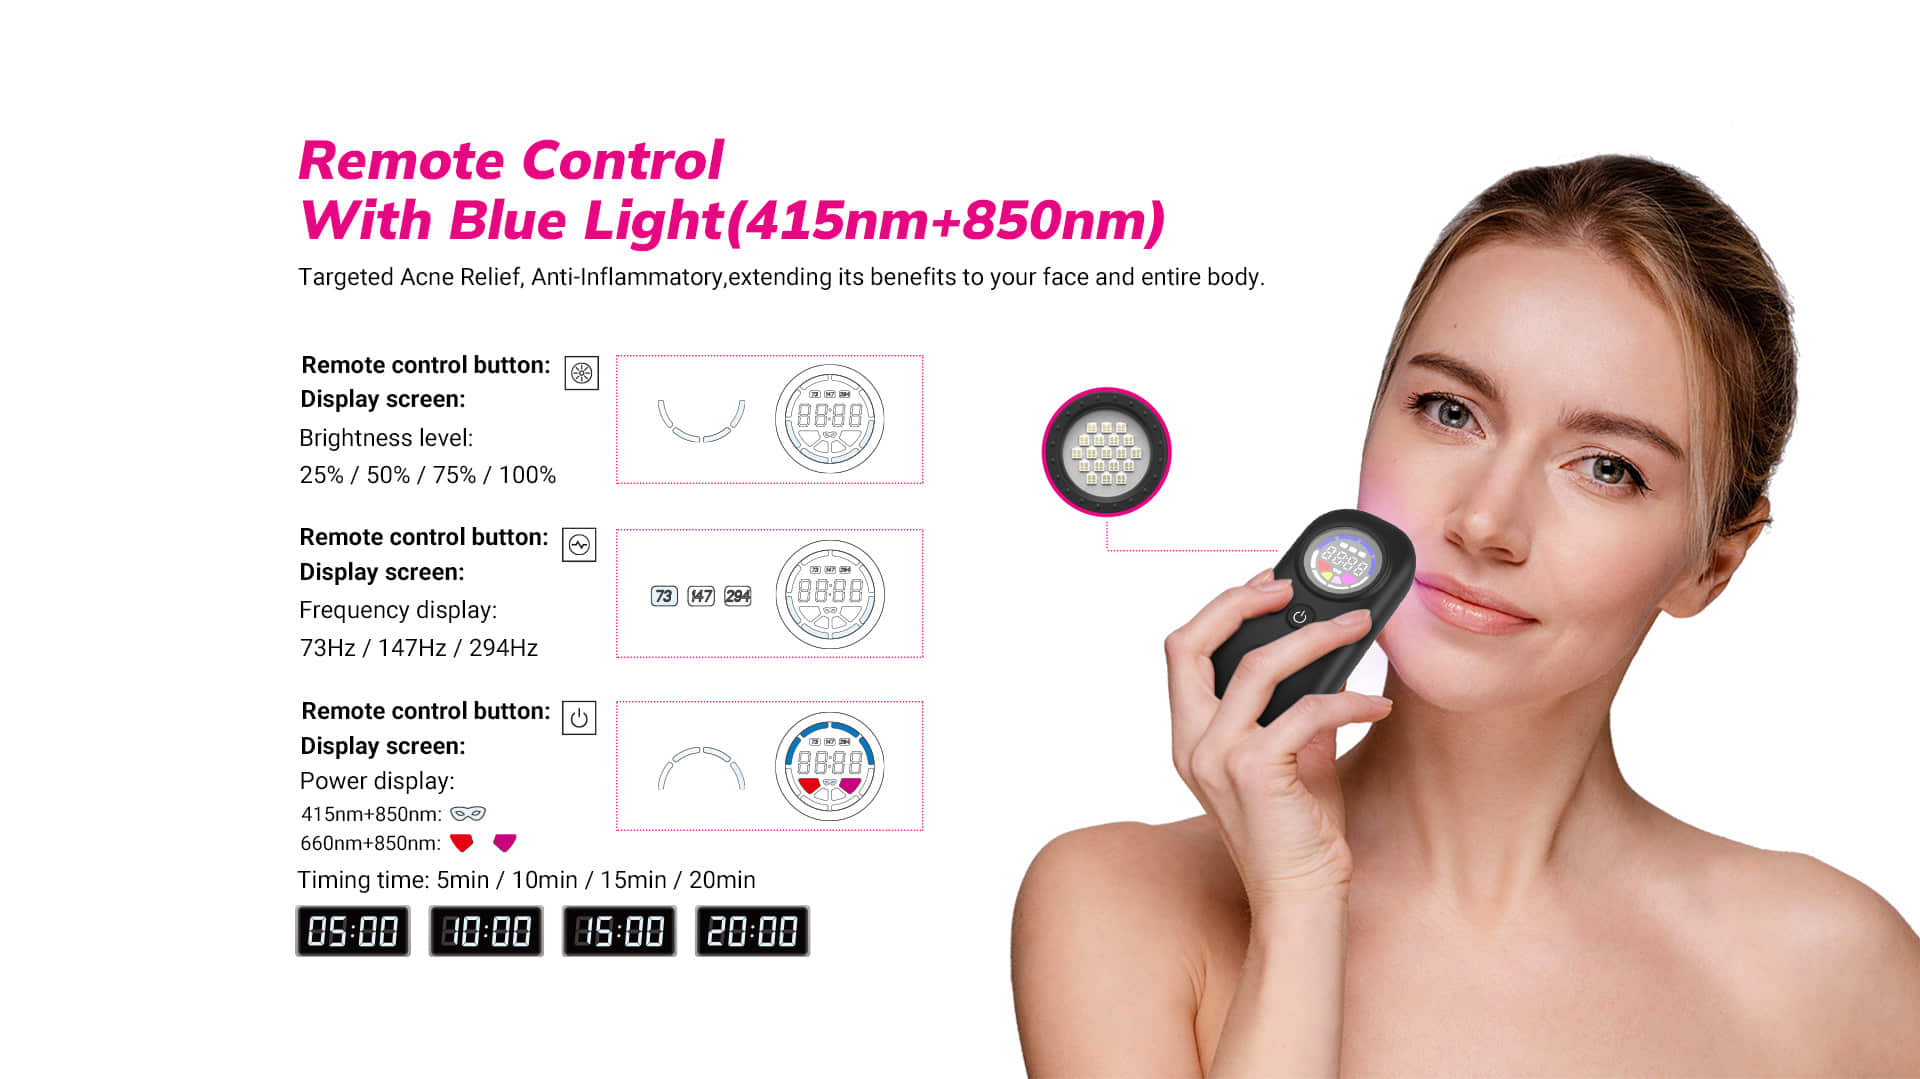 RLB04 Remote Control With Blue Light(415nm+850nm)_05